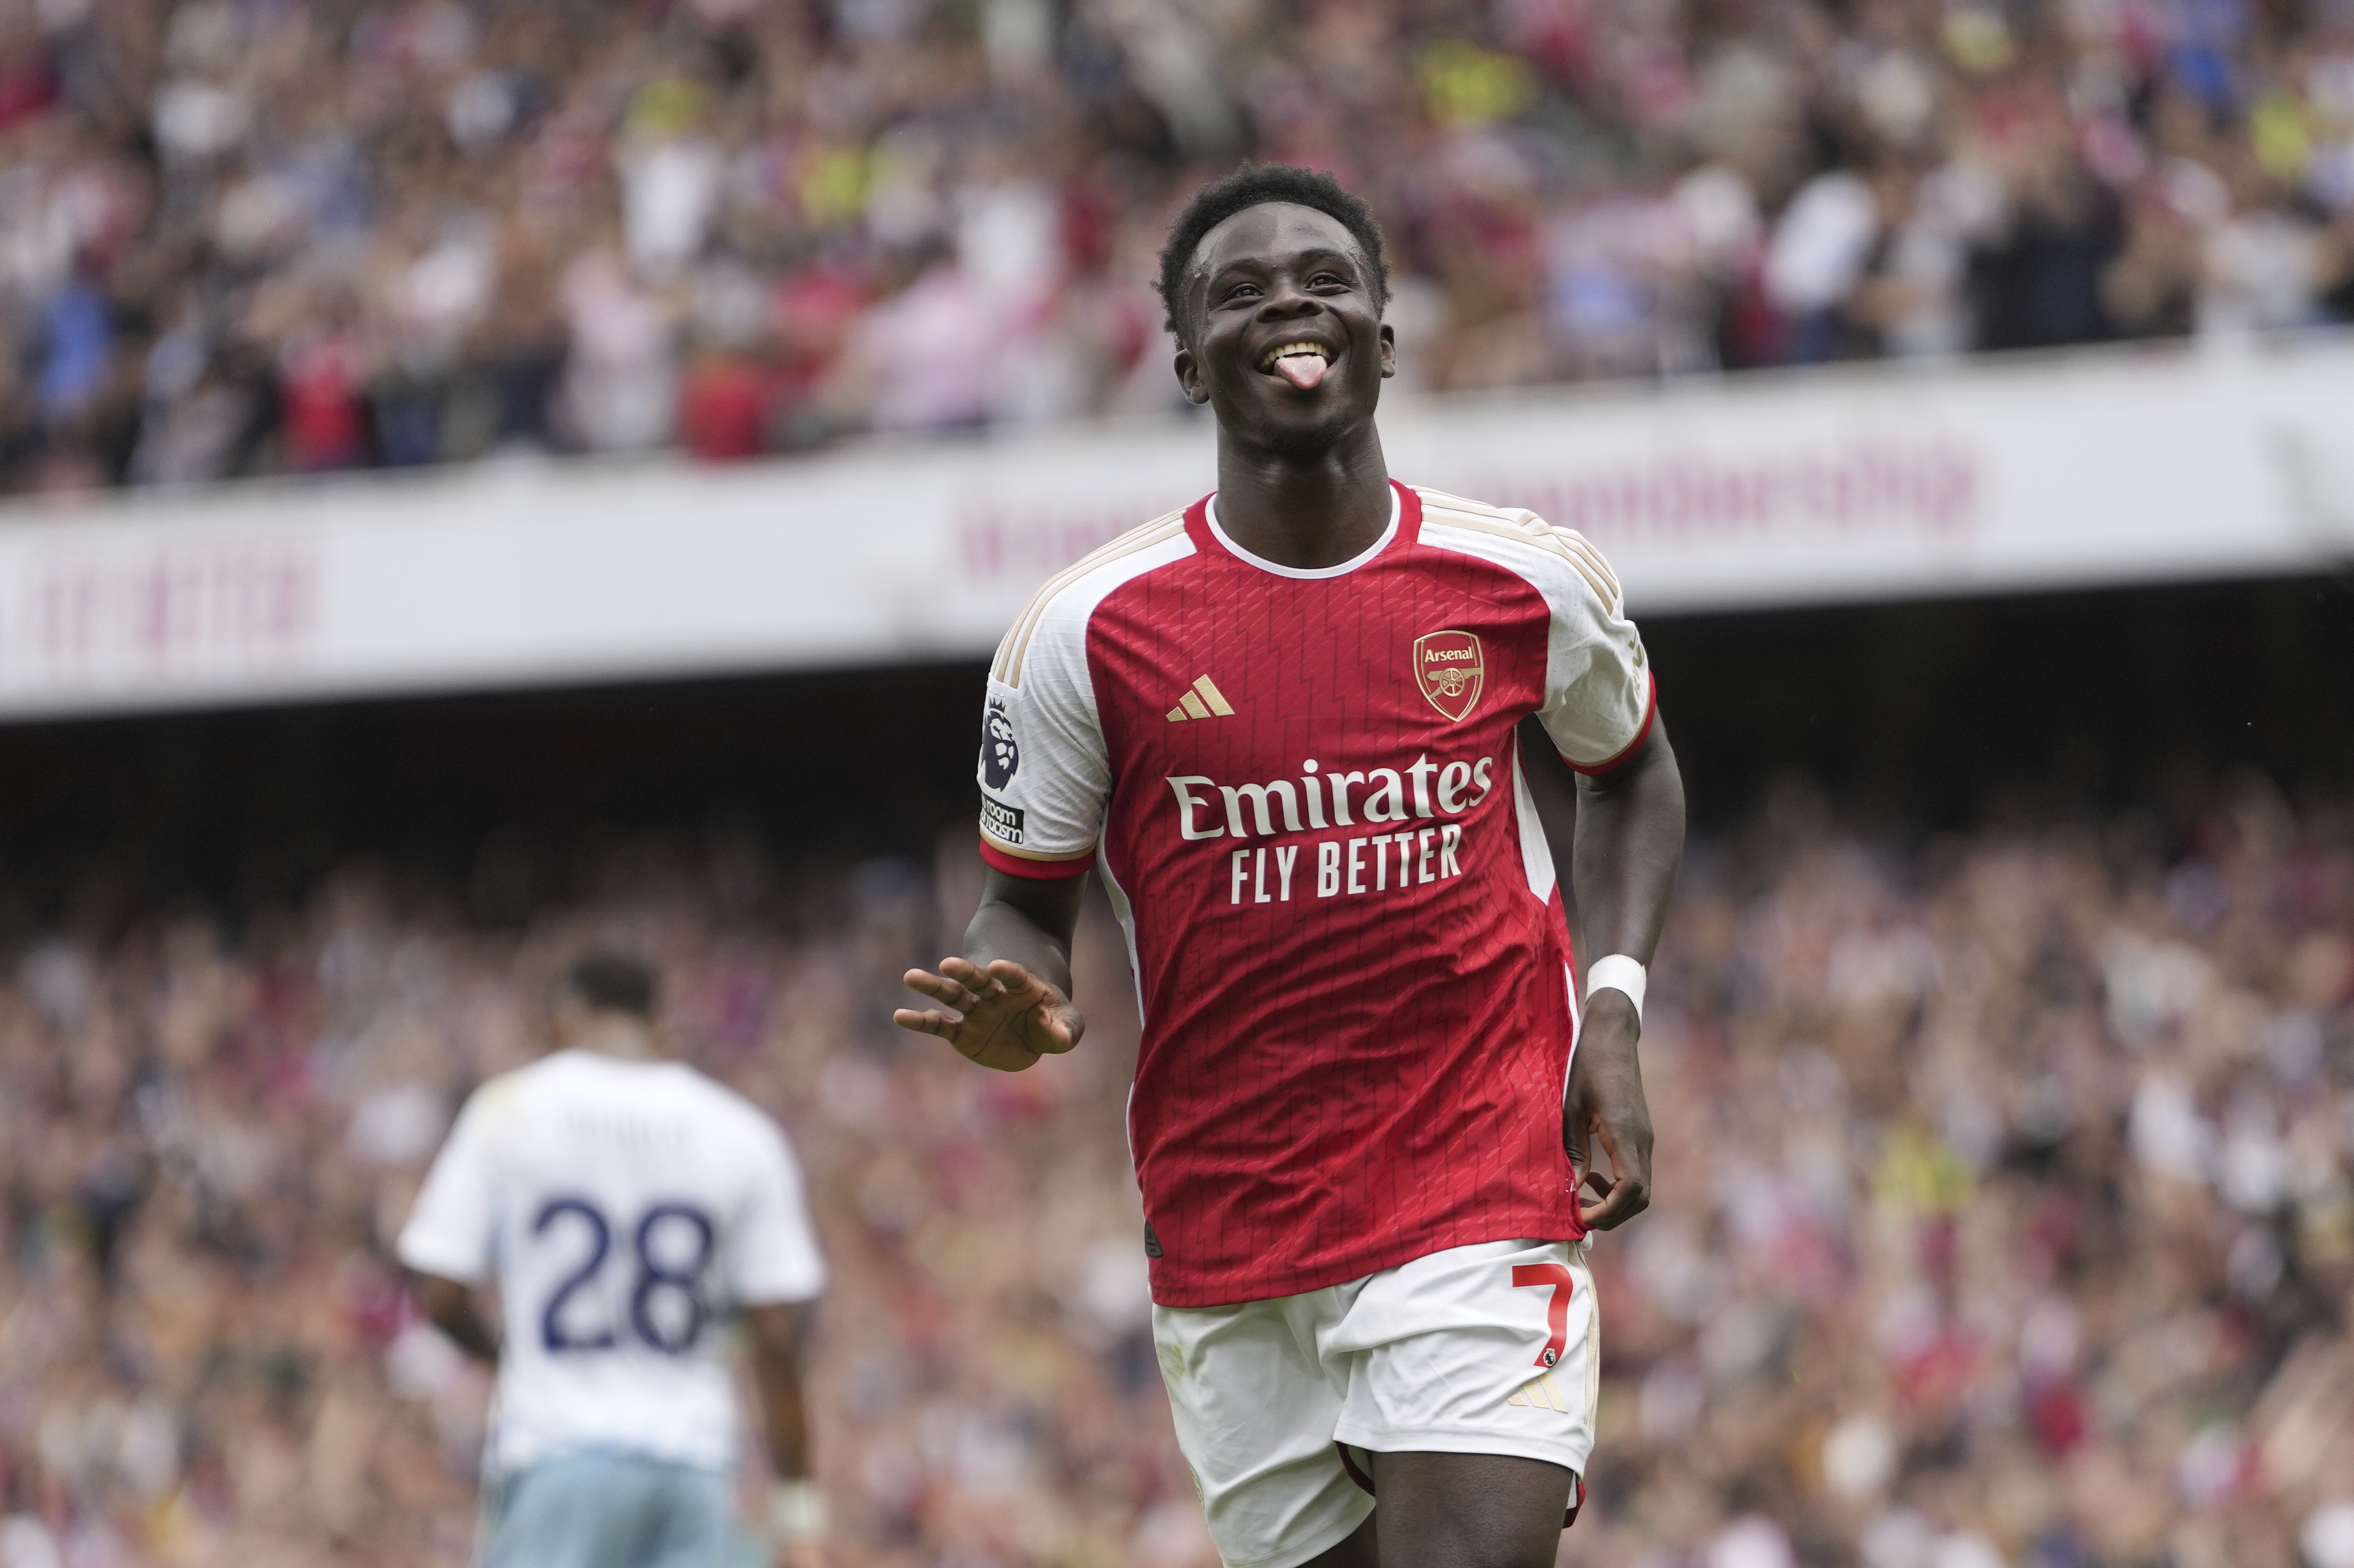 Saka scored in Arsenal's opening weekend win over Nottingham Forest